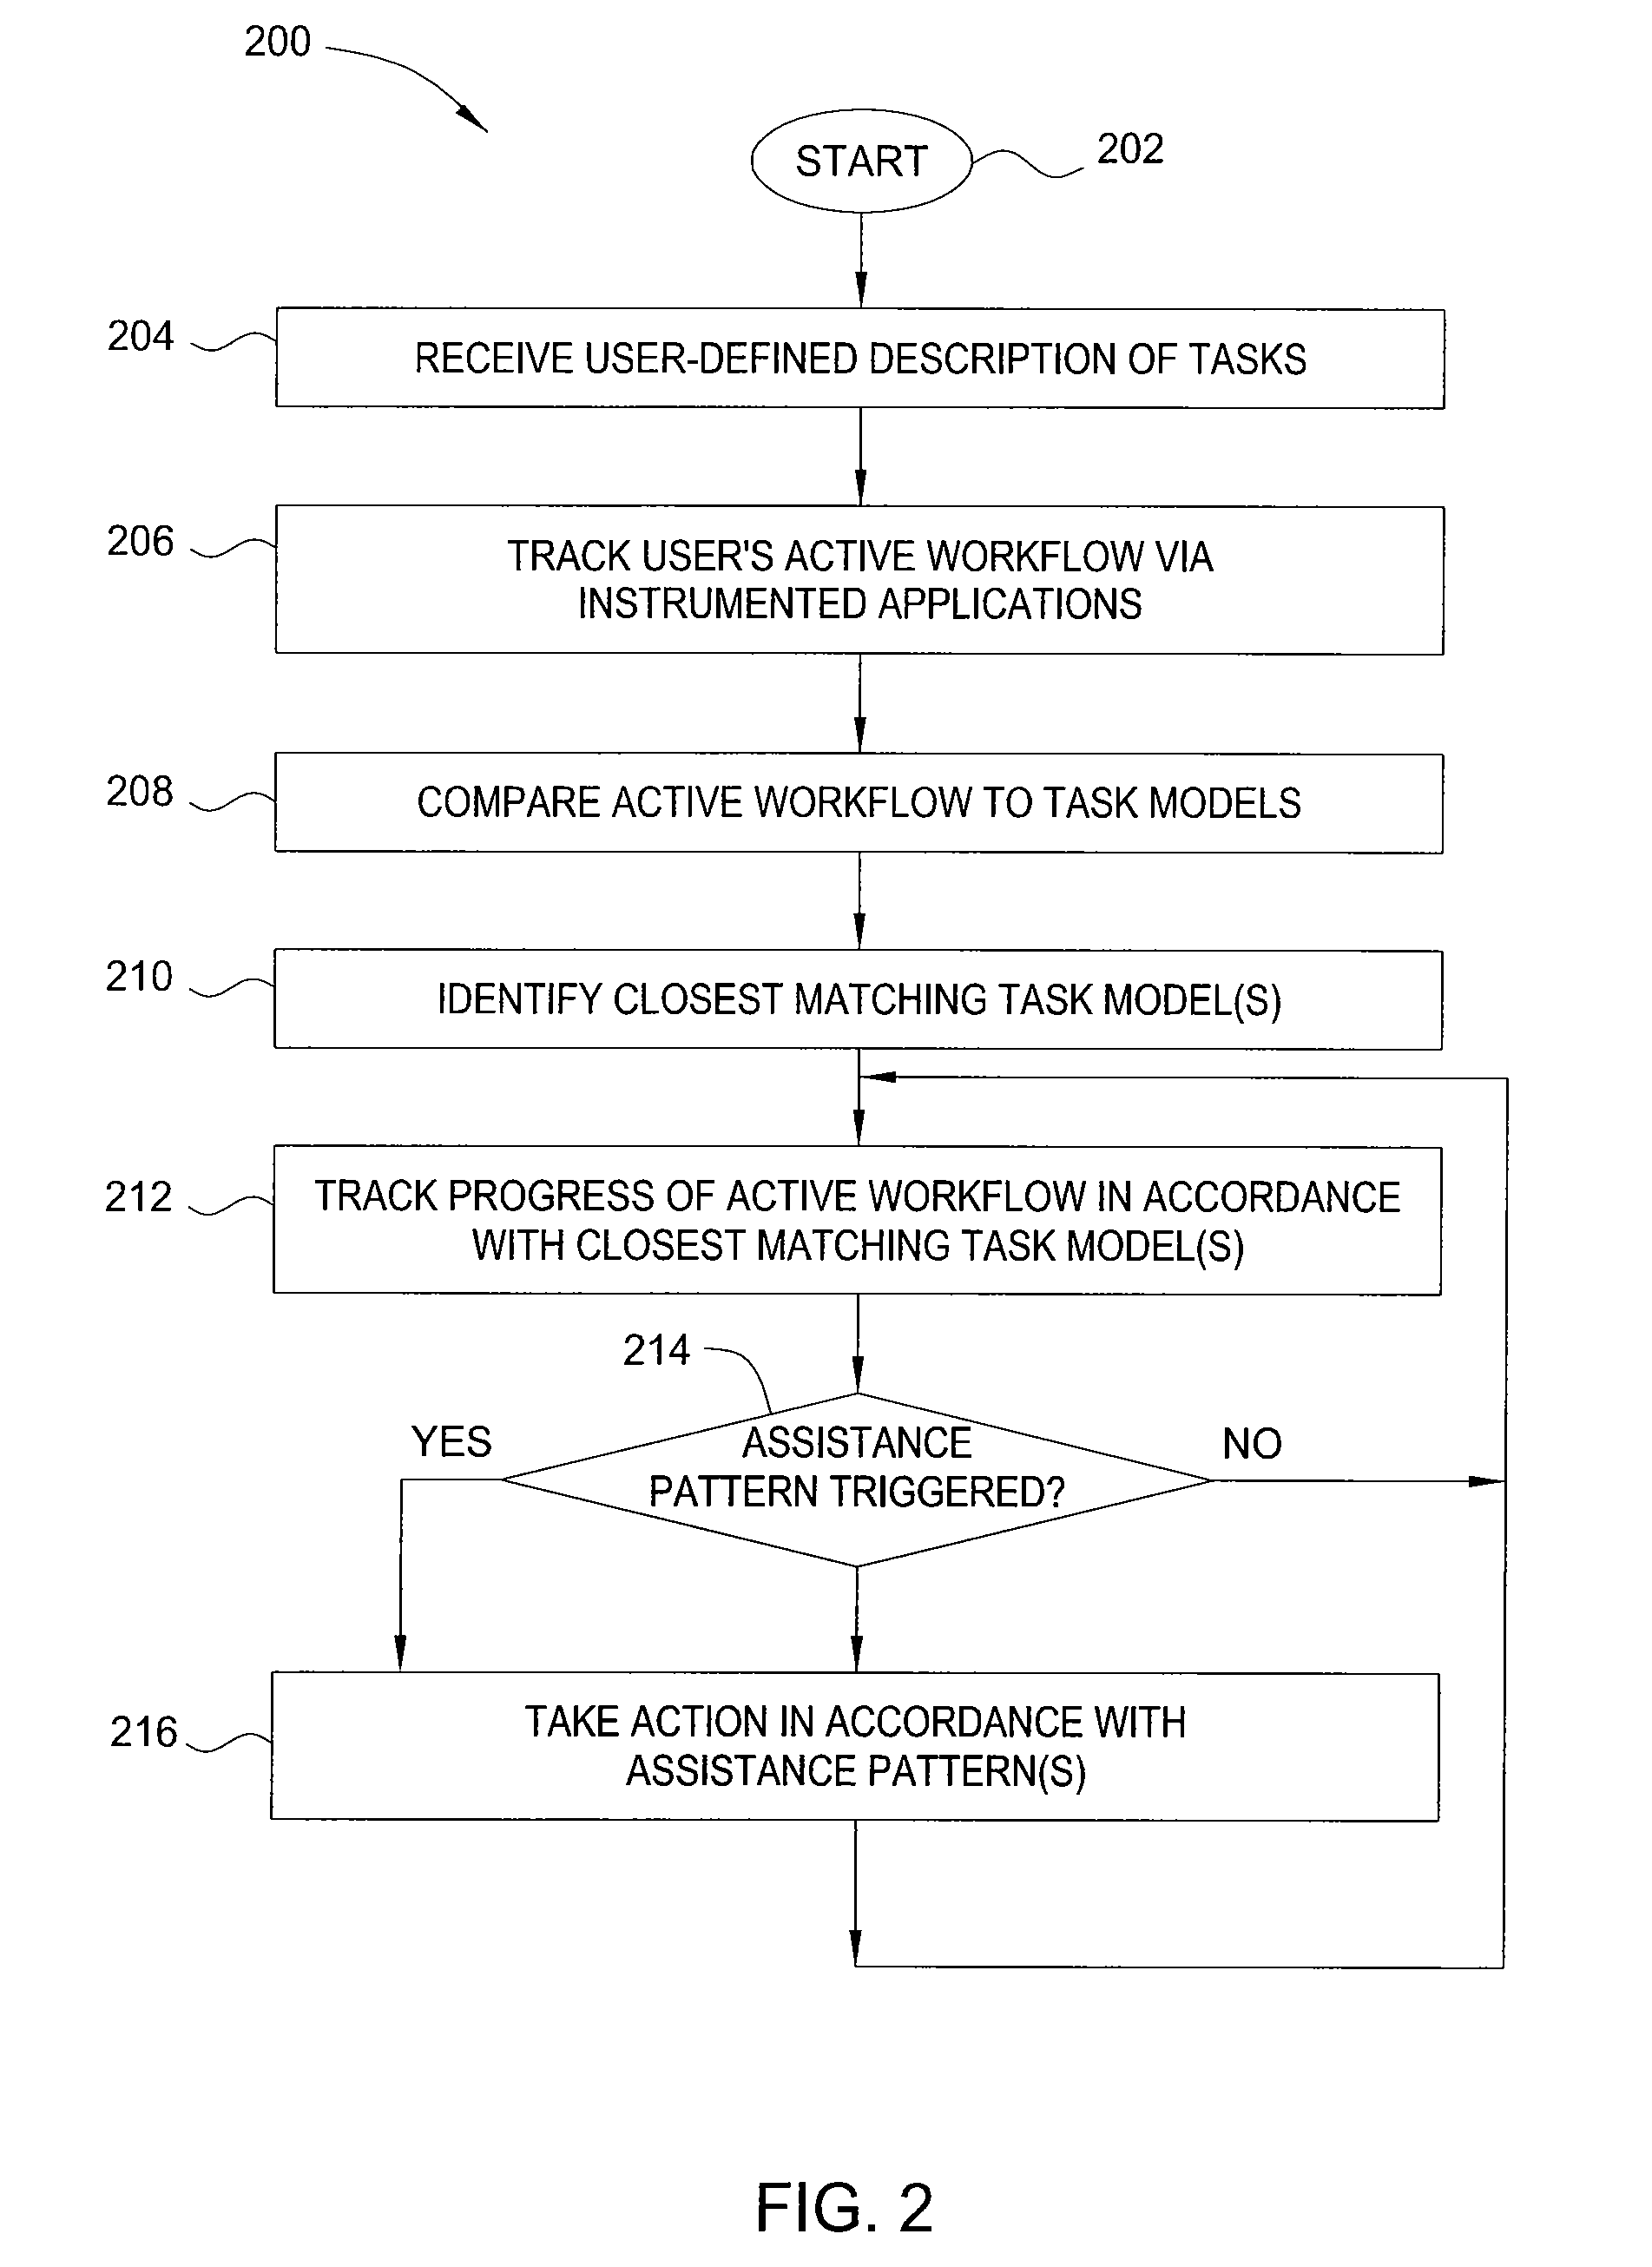 Method and apparatus for automated assistance with task management